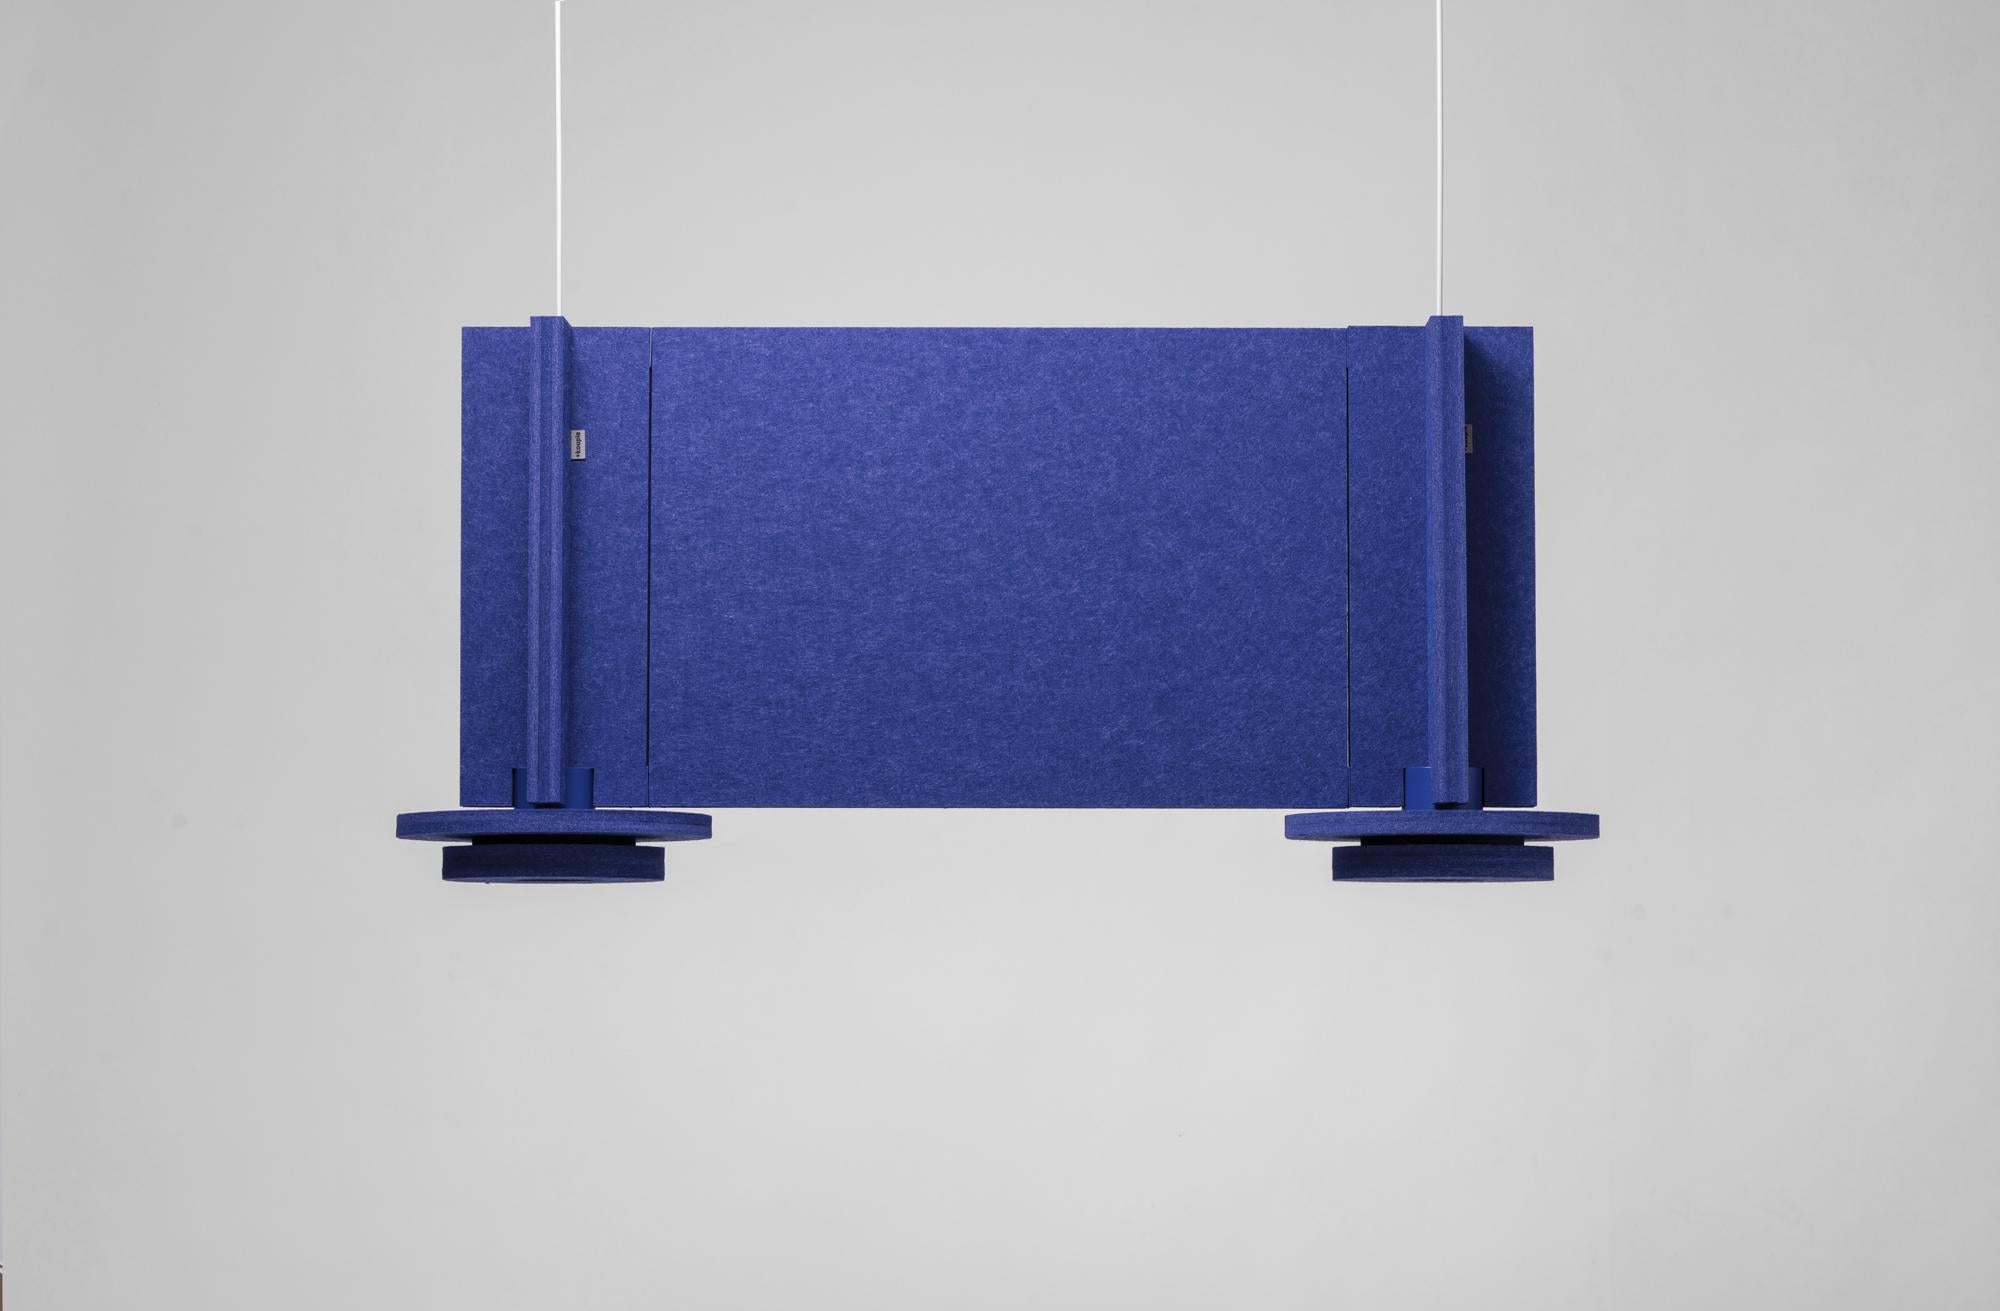 Jeffrey Panel Blue Pendant Lamp by +kouple
Dimensions: W 60 x H 41,5 cm.
Materials: Recycled polyester (PET felt) and powder-coated steel.

All our lamps can be wired according to each country. If sold to the USA it will be wired for the USA for